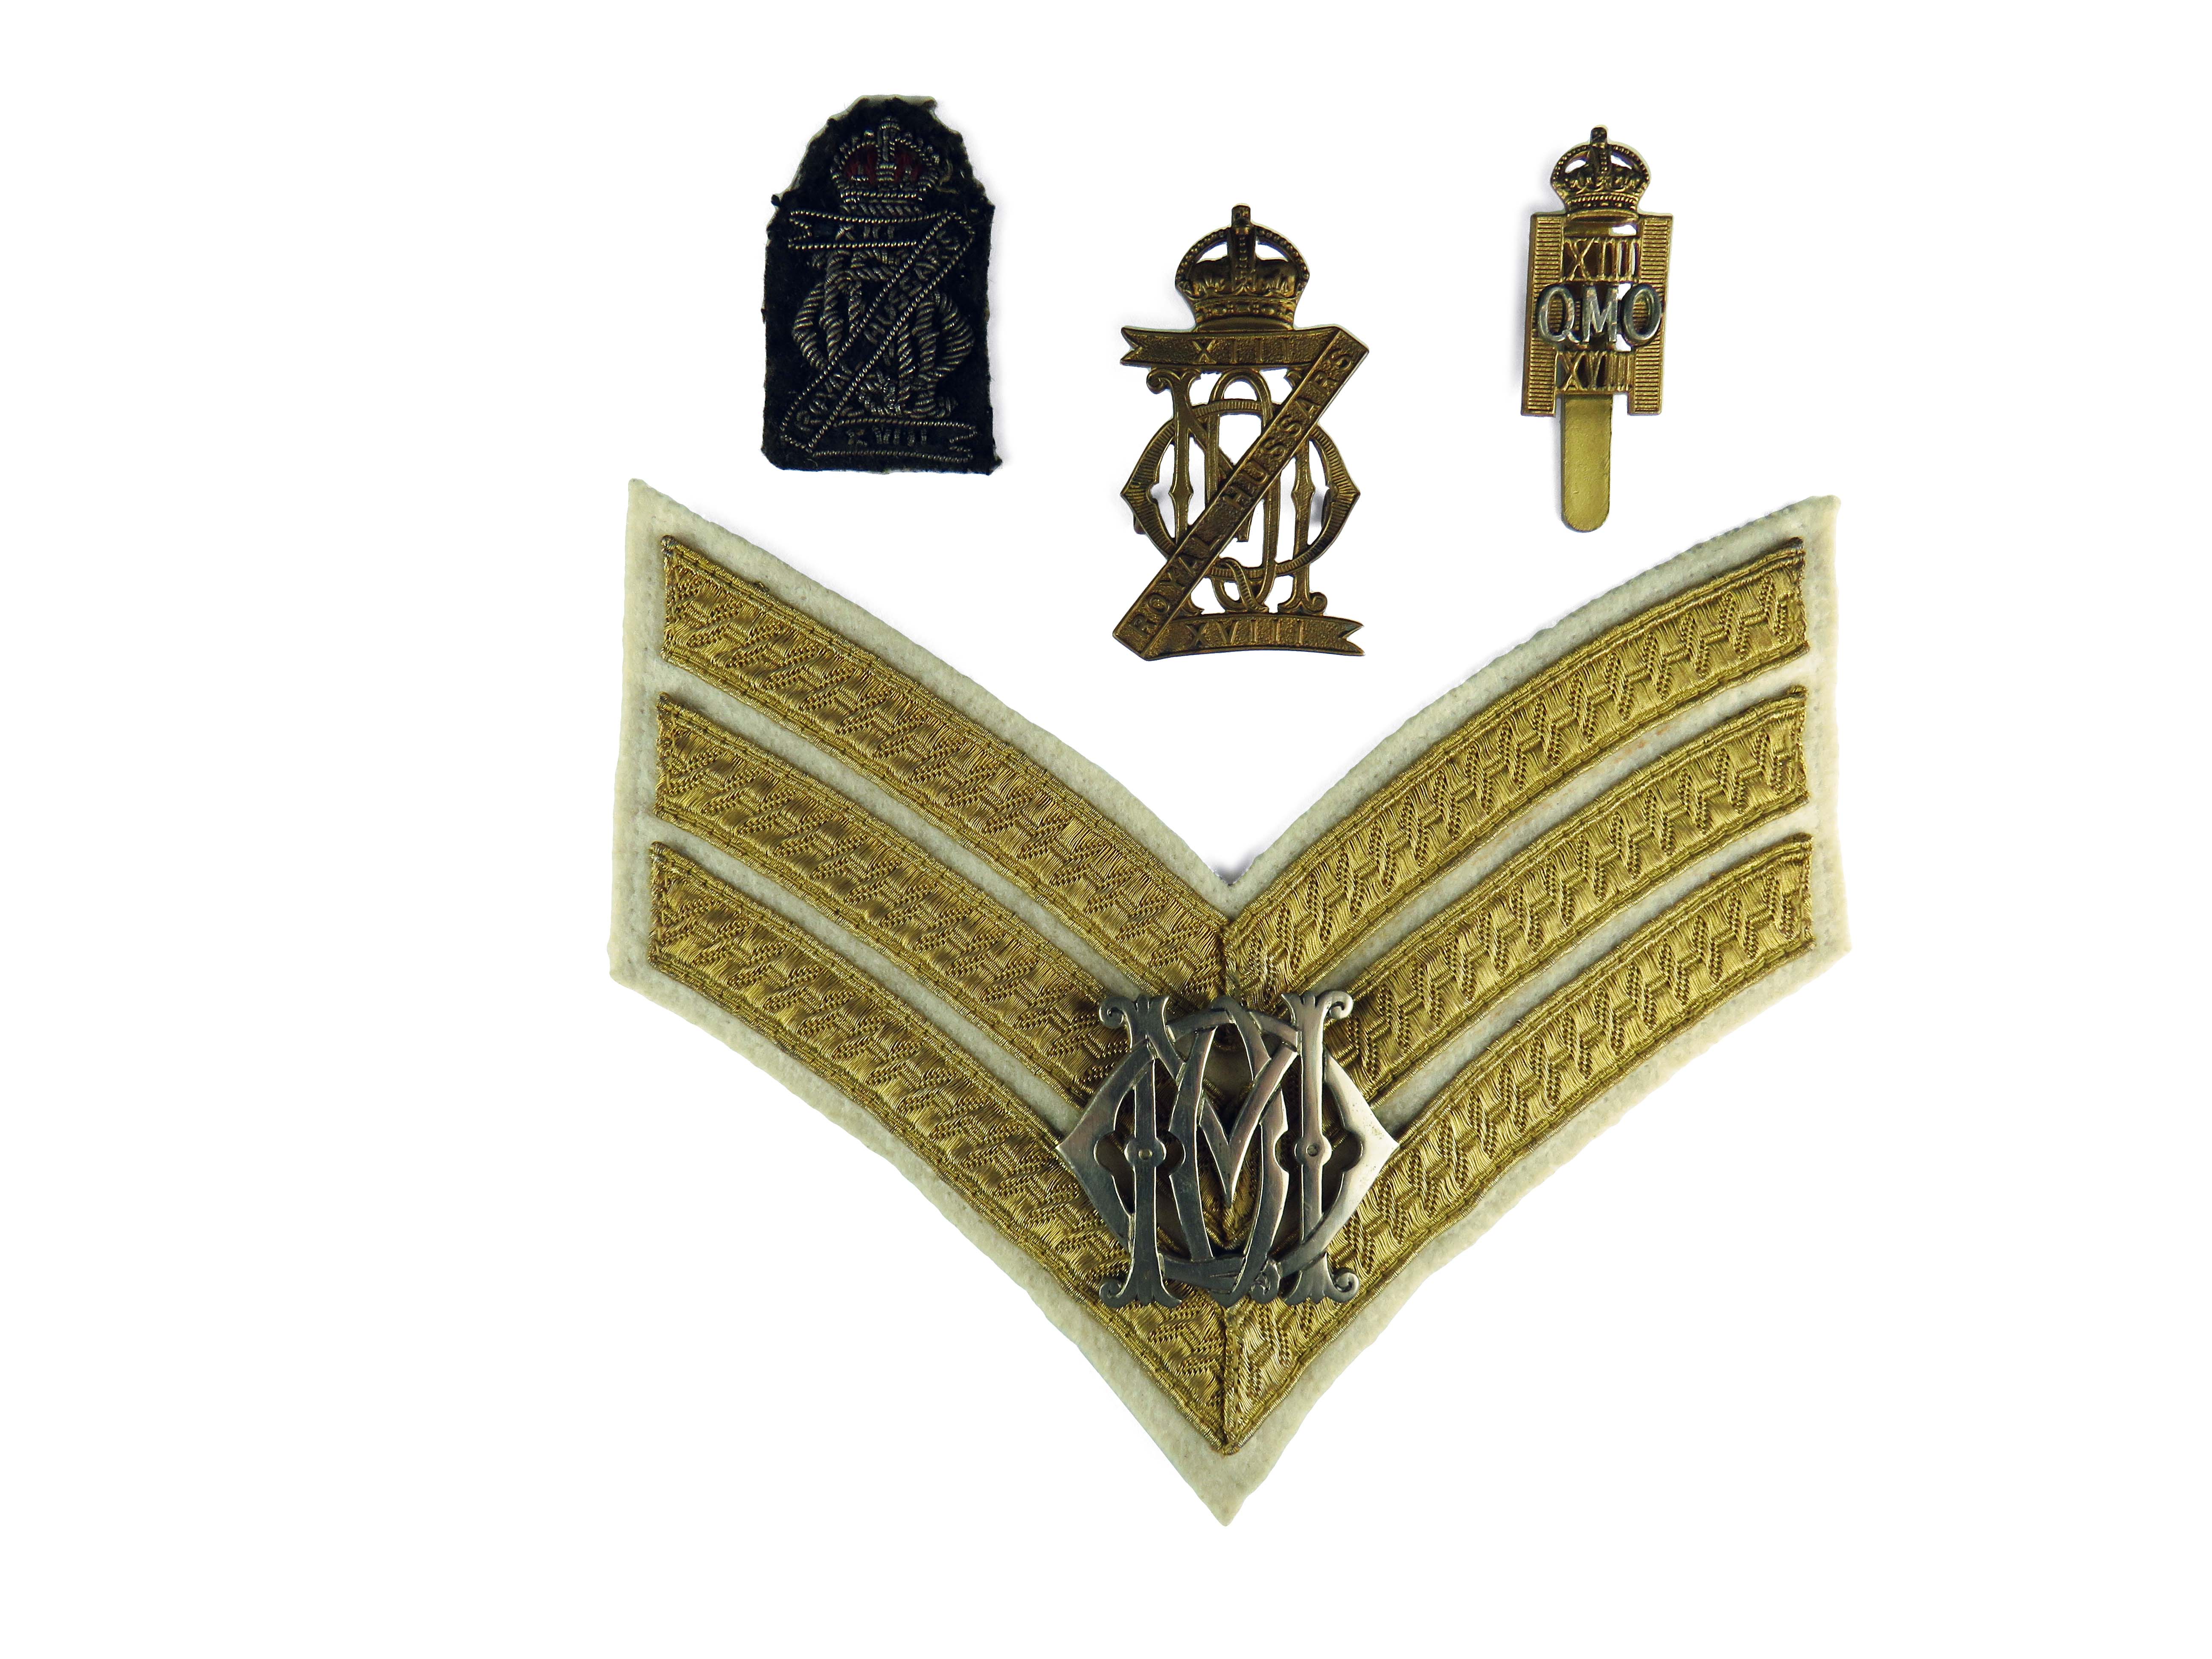 Selection of 13/18 Royal Hussars Badges - Image 2 of 2